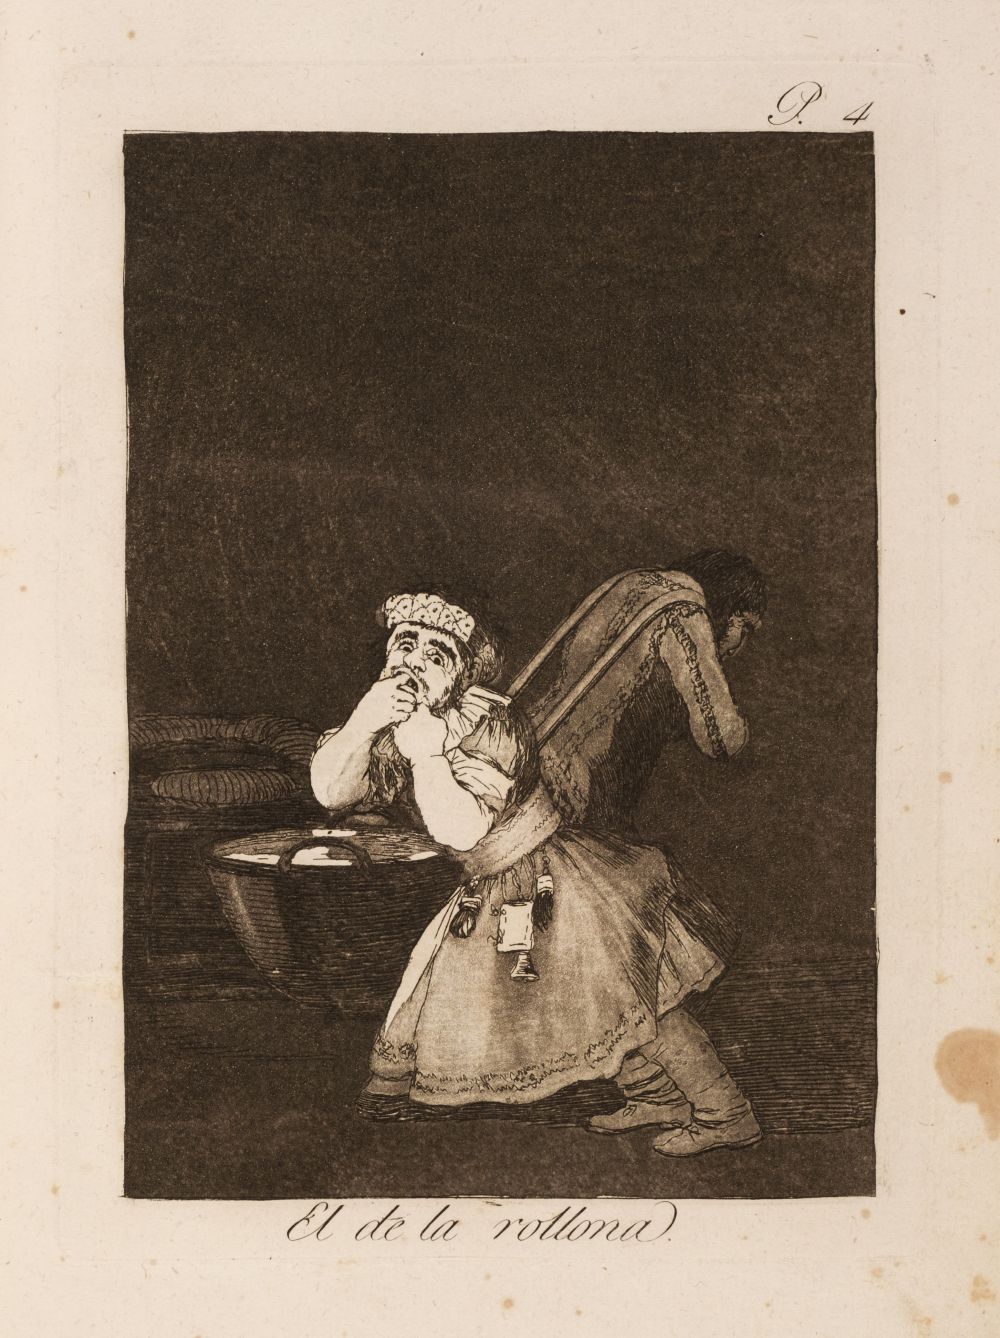 Goya (Francisco de, 1746-1828) Los Caprichos, 1799, the complete set of 80 etchings, FIRST EDITION - Image 4 of 37